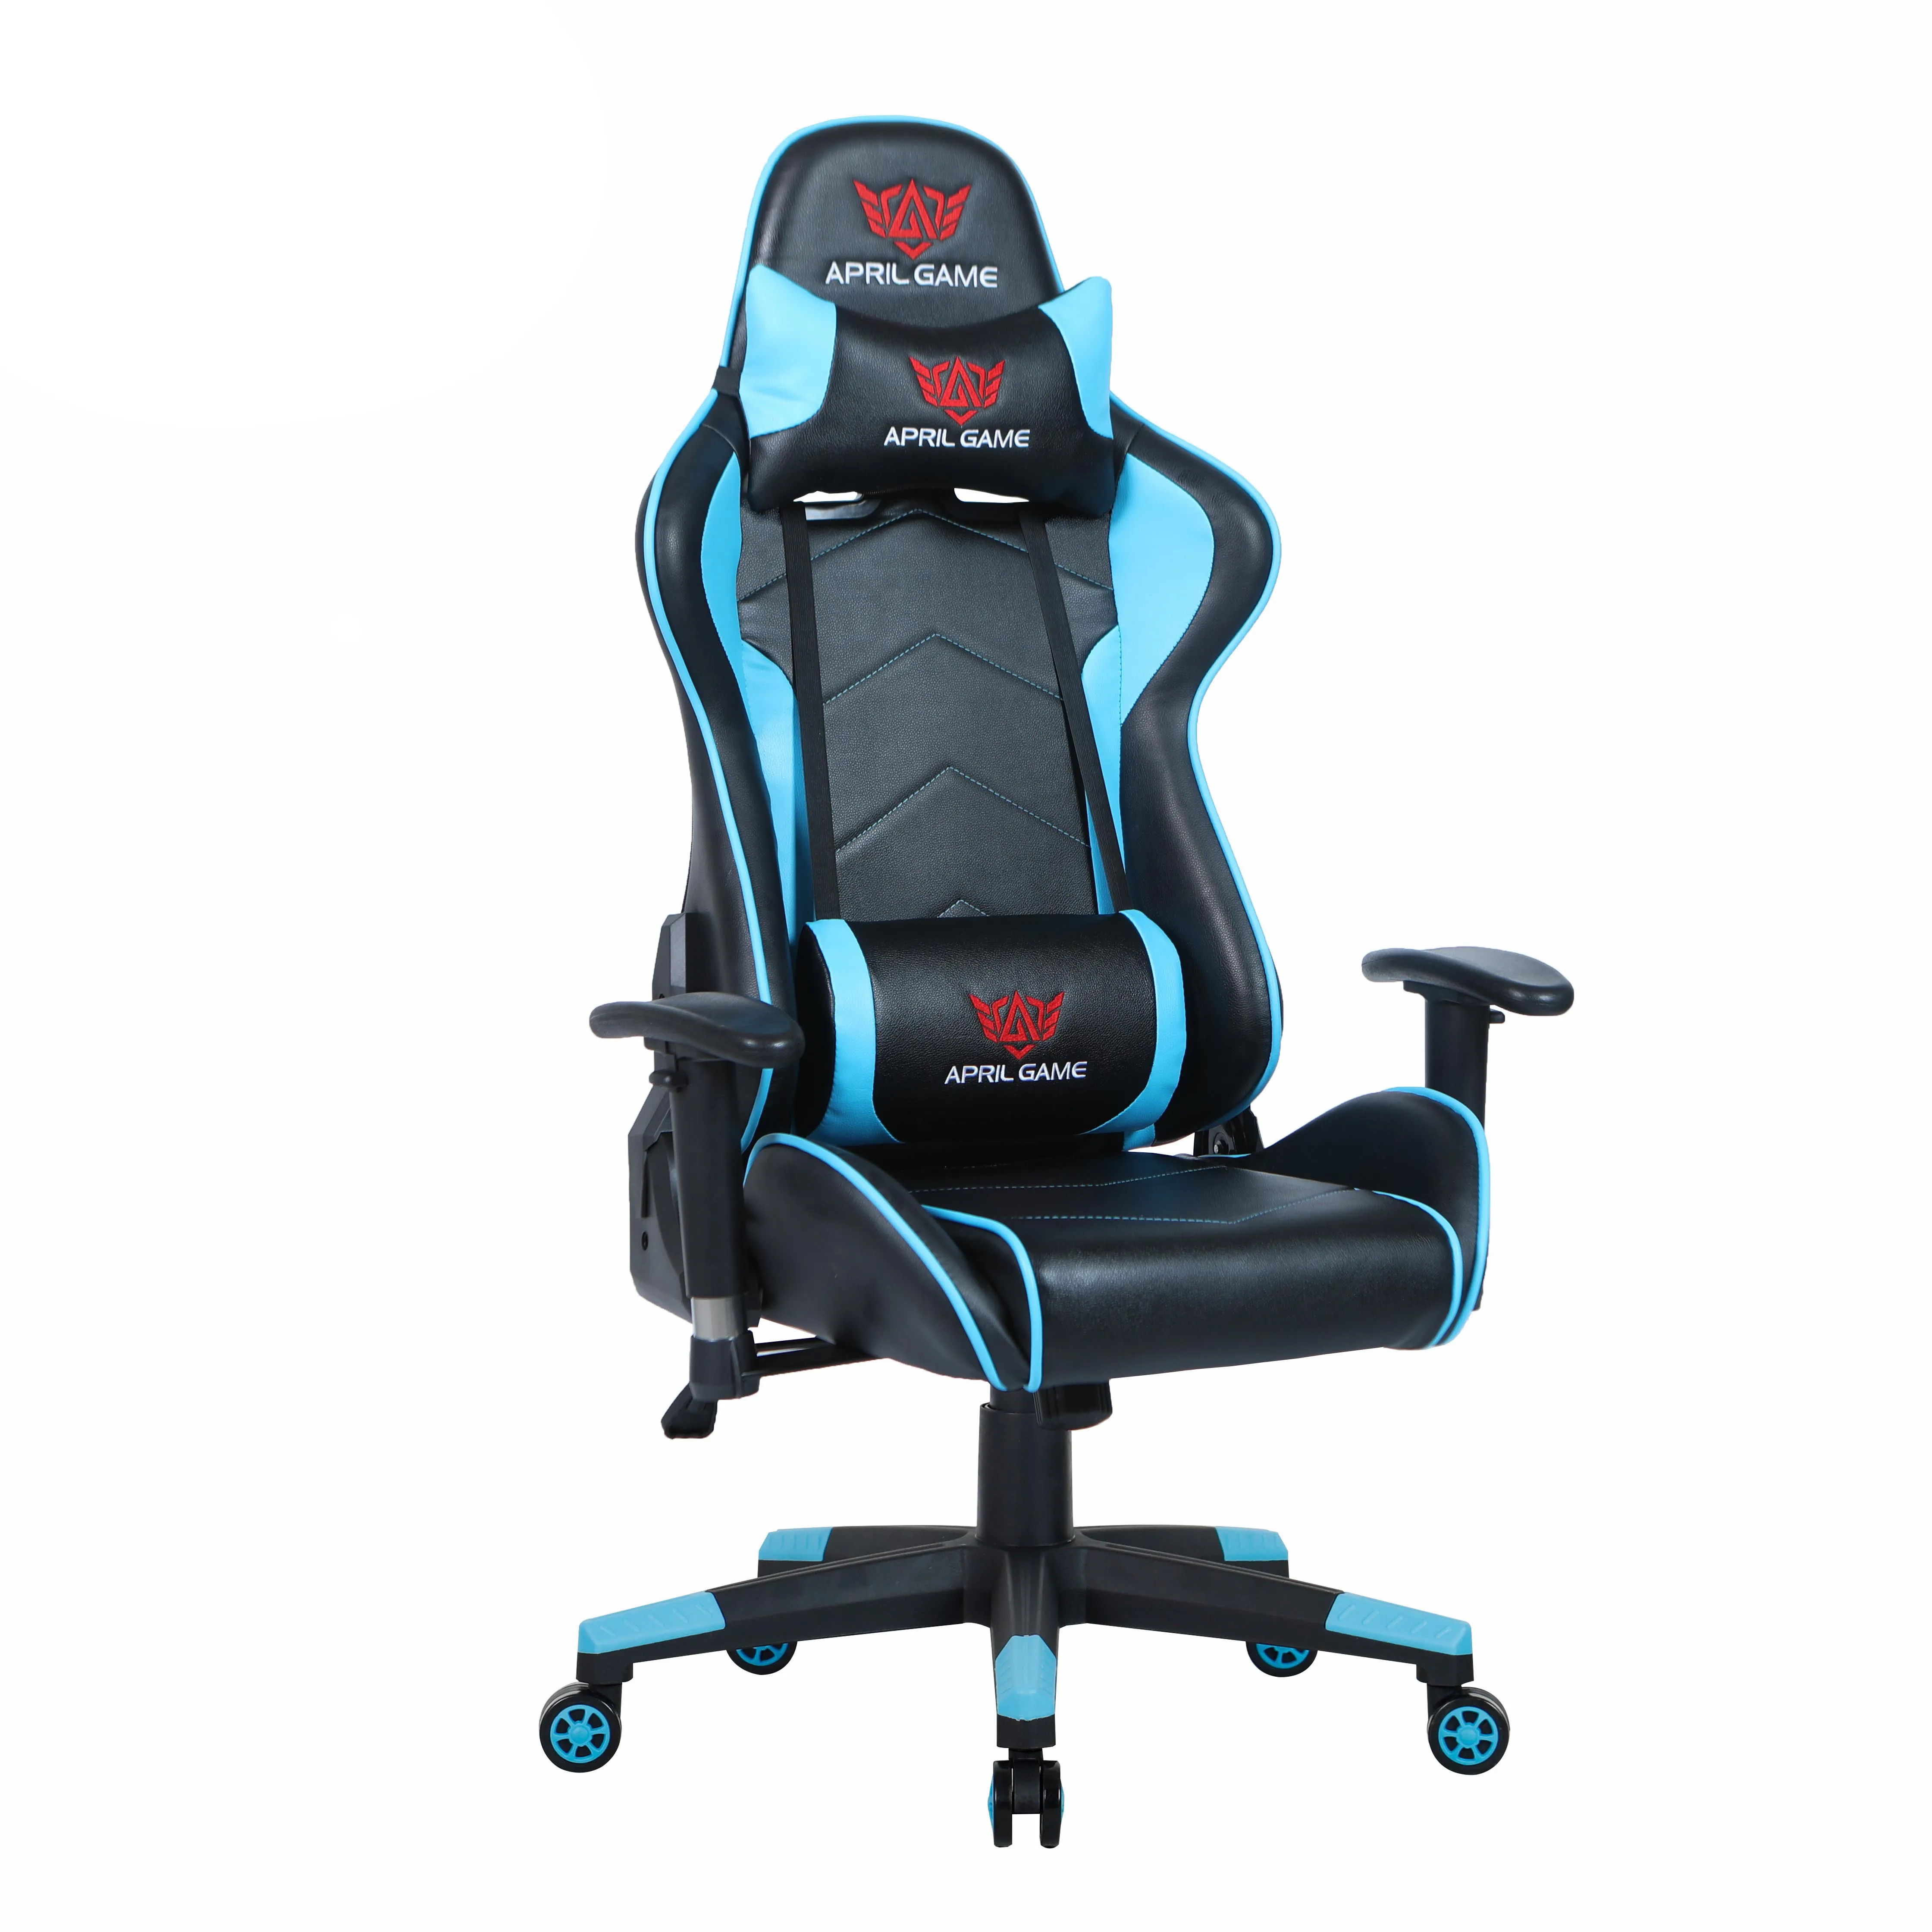 New Product Customize Embroidery Logo Adjustable Silla Gaming Chair Gamer Buy Silla Gamer Gaming Gamer Chair Gaming Customize Embroidery Logo Gaming Chair Product On Alibaba Com